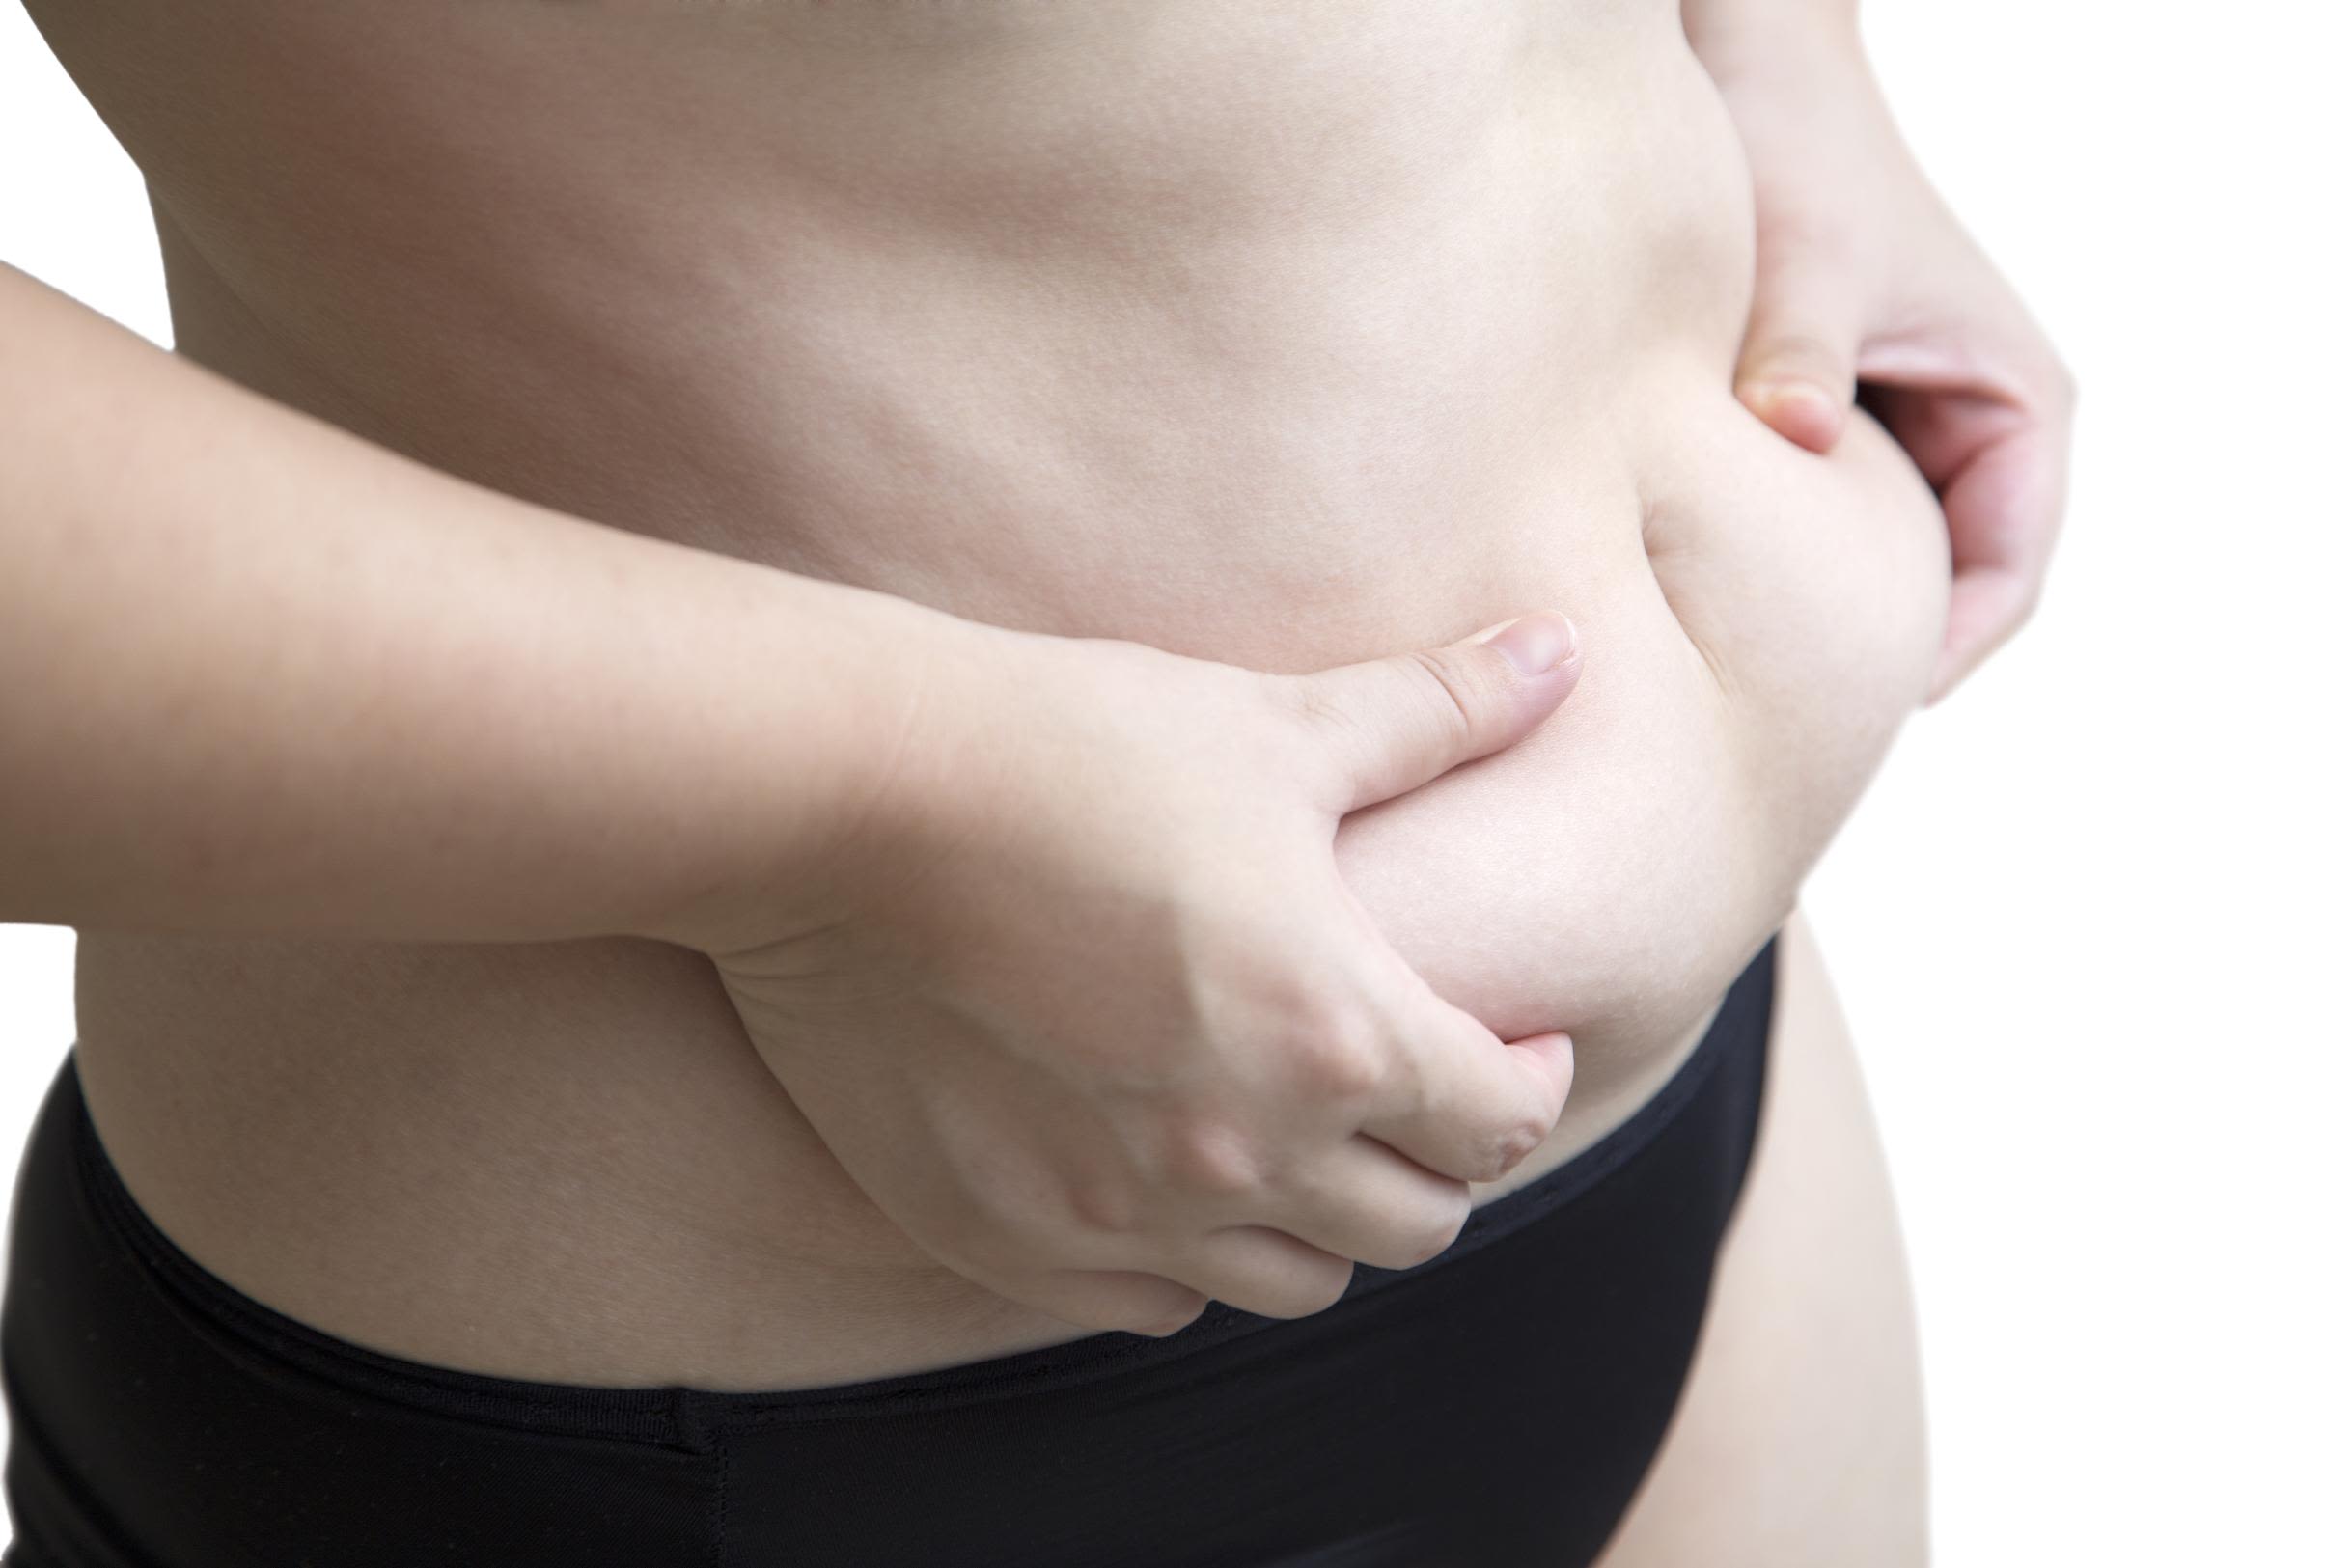 Hormone replacement may fight belly fat, study says | CNN